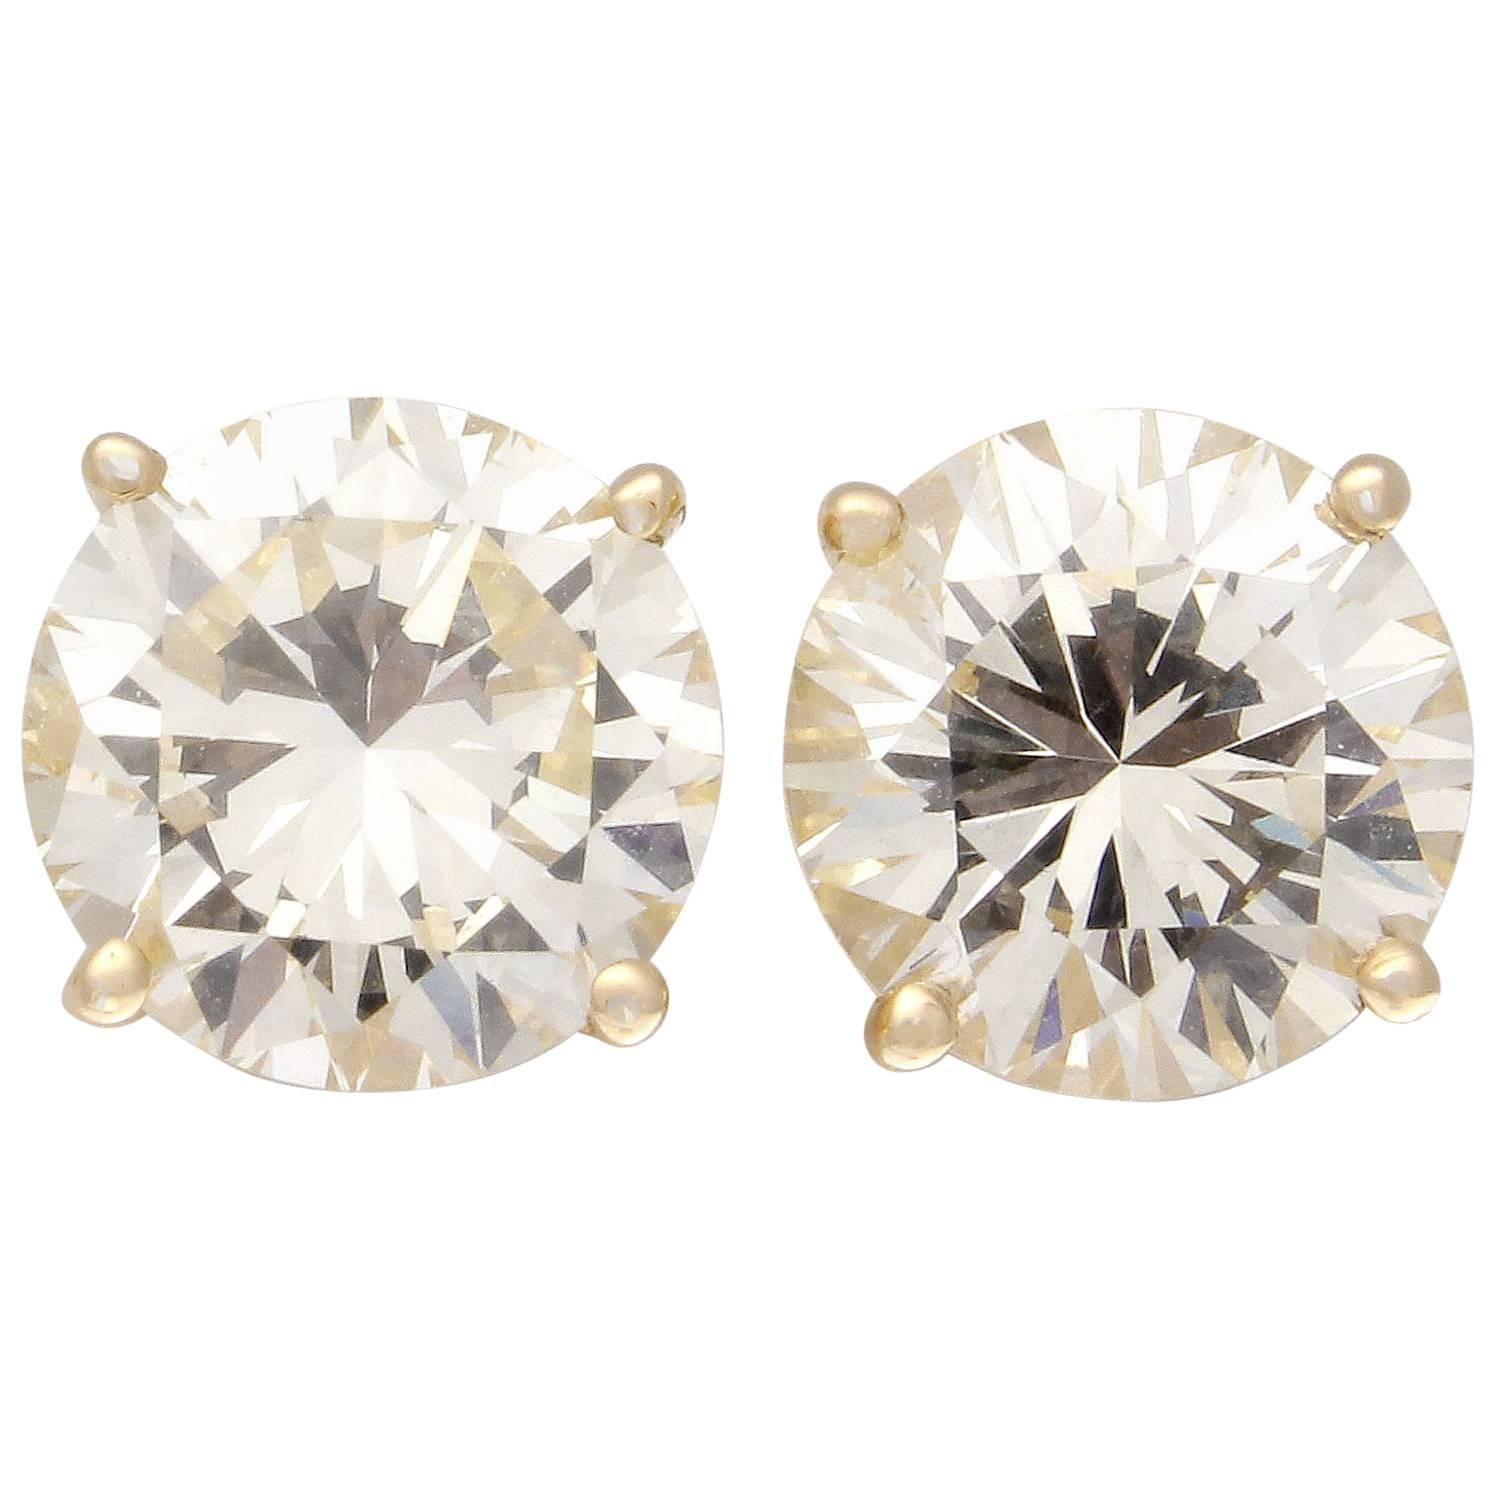 Clean, crisp elegant beauty. The earrings are scintillating and full of life. Featuring two gracefully matched modern round brilliant cut diamonds weighing 1.92 carats and 1.94 carats. Set in 18k yellow gold. Very well priced for such a big